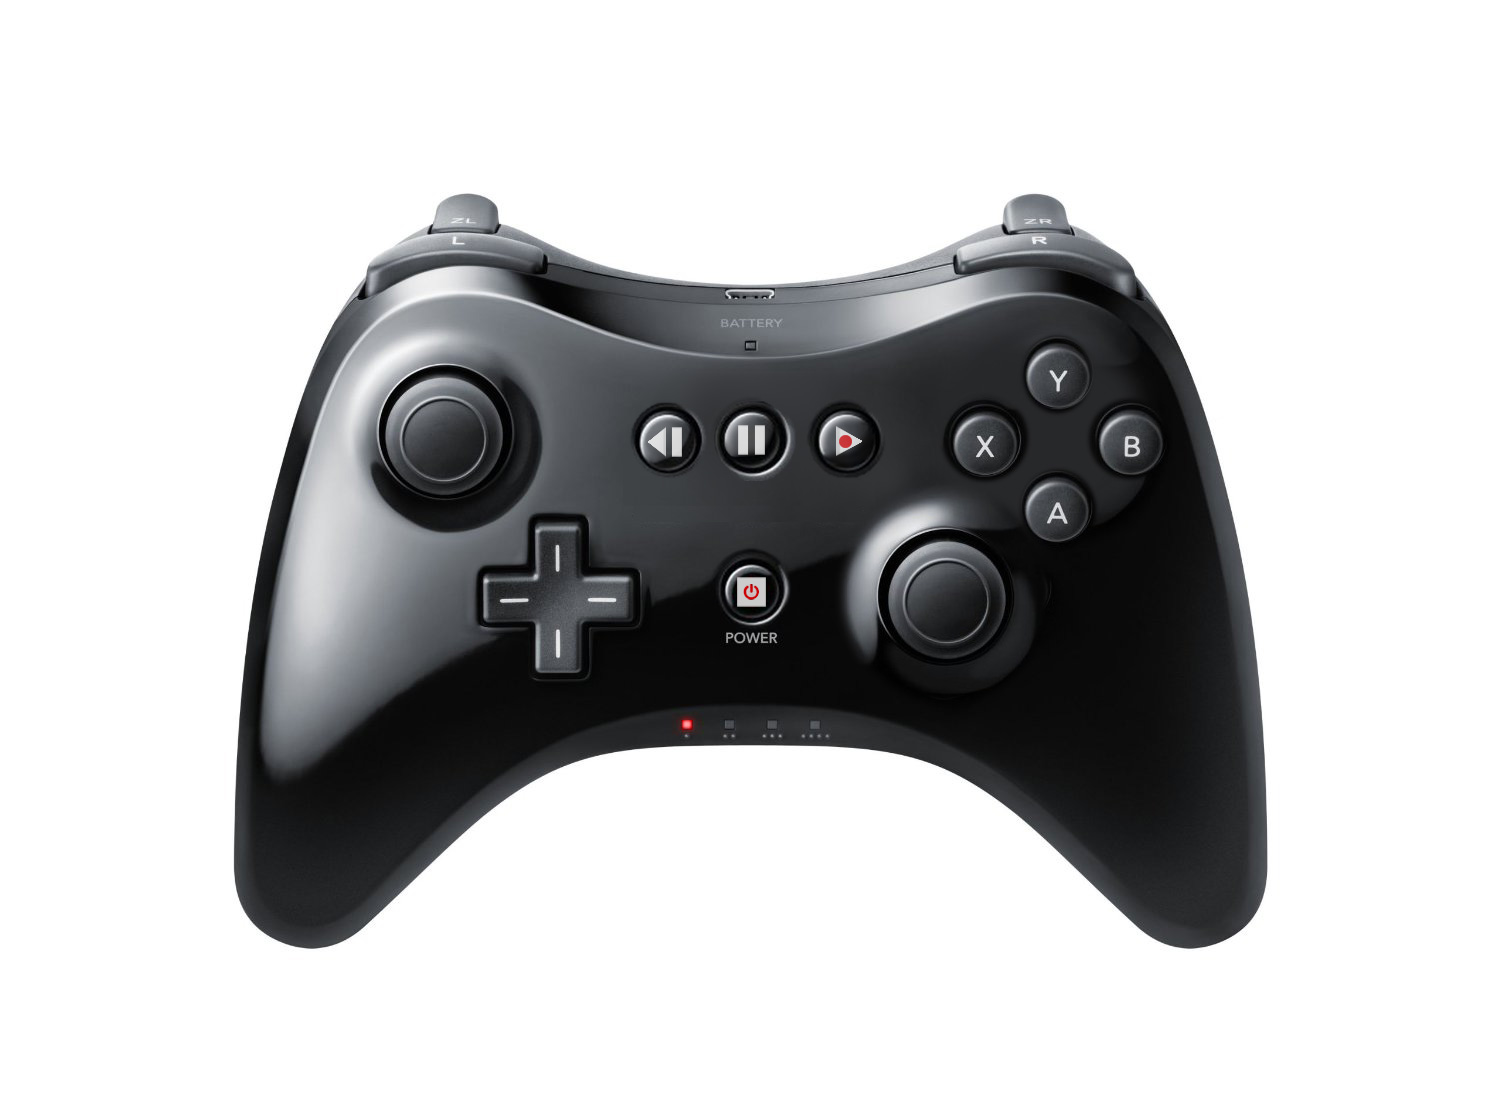 IMAGE(http://www.imbarkus.com/images/Controller_concept_4thdimoffset.jpg)